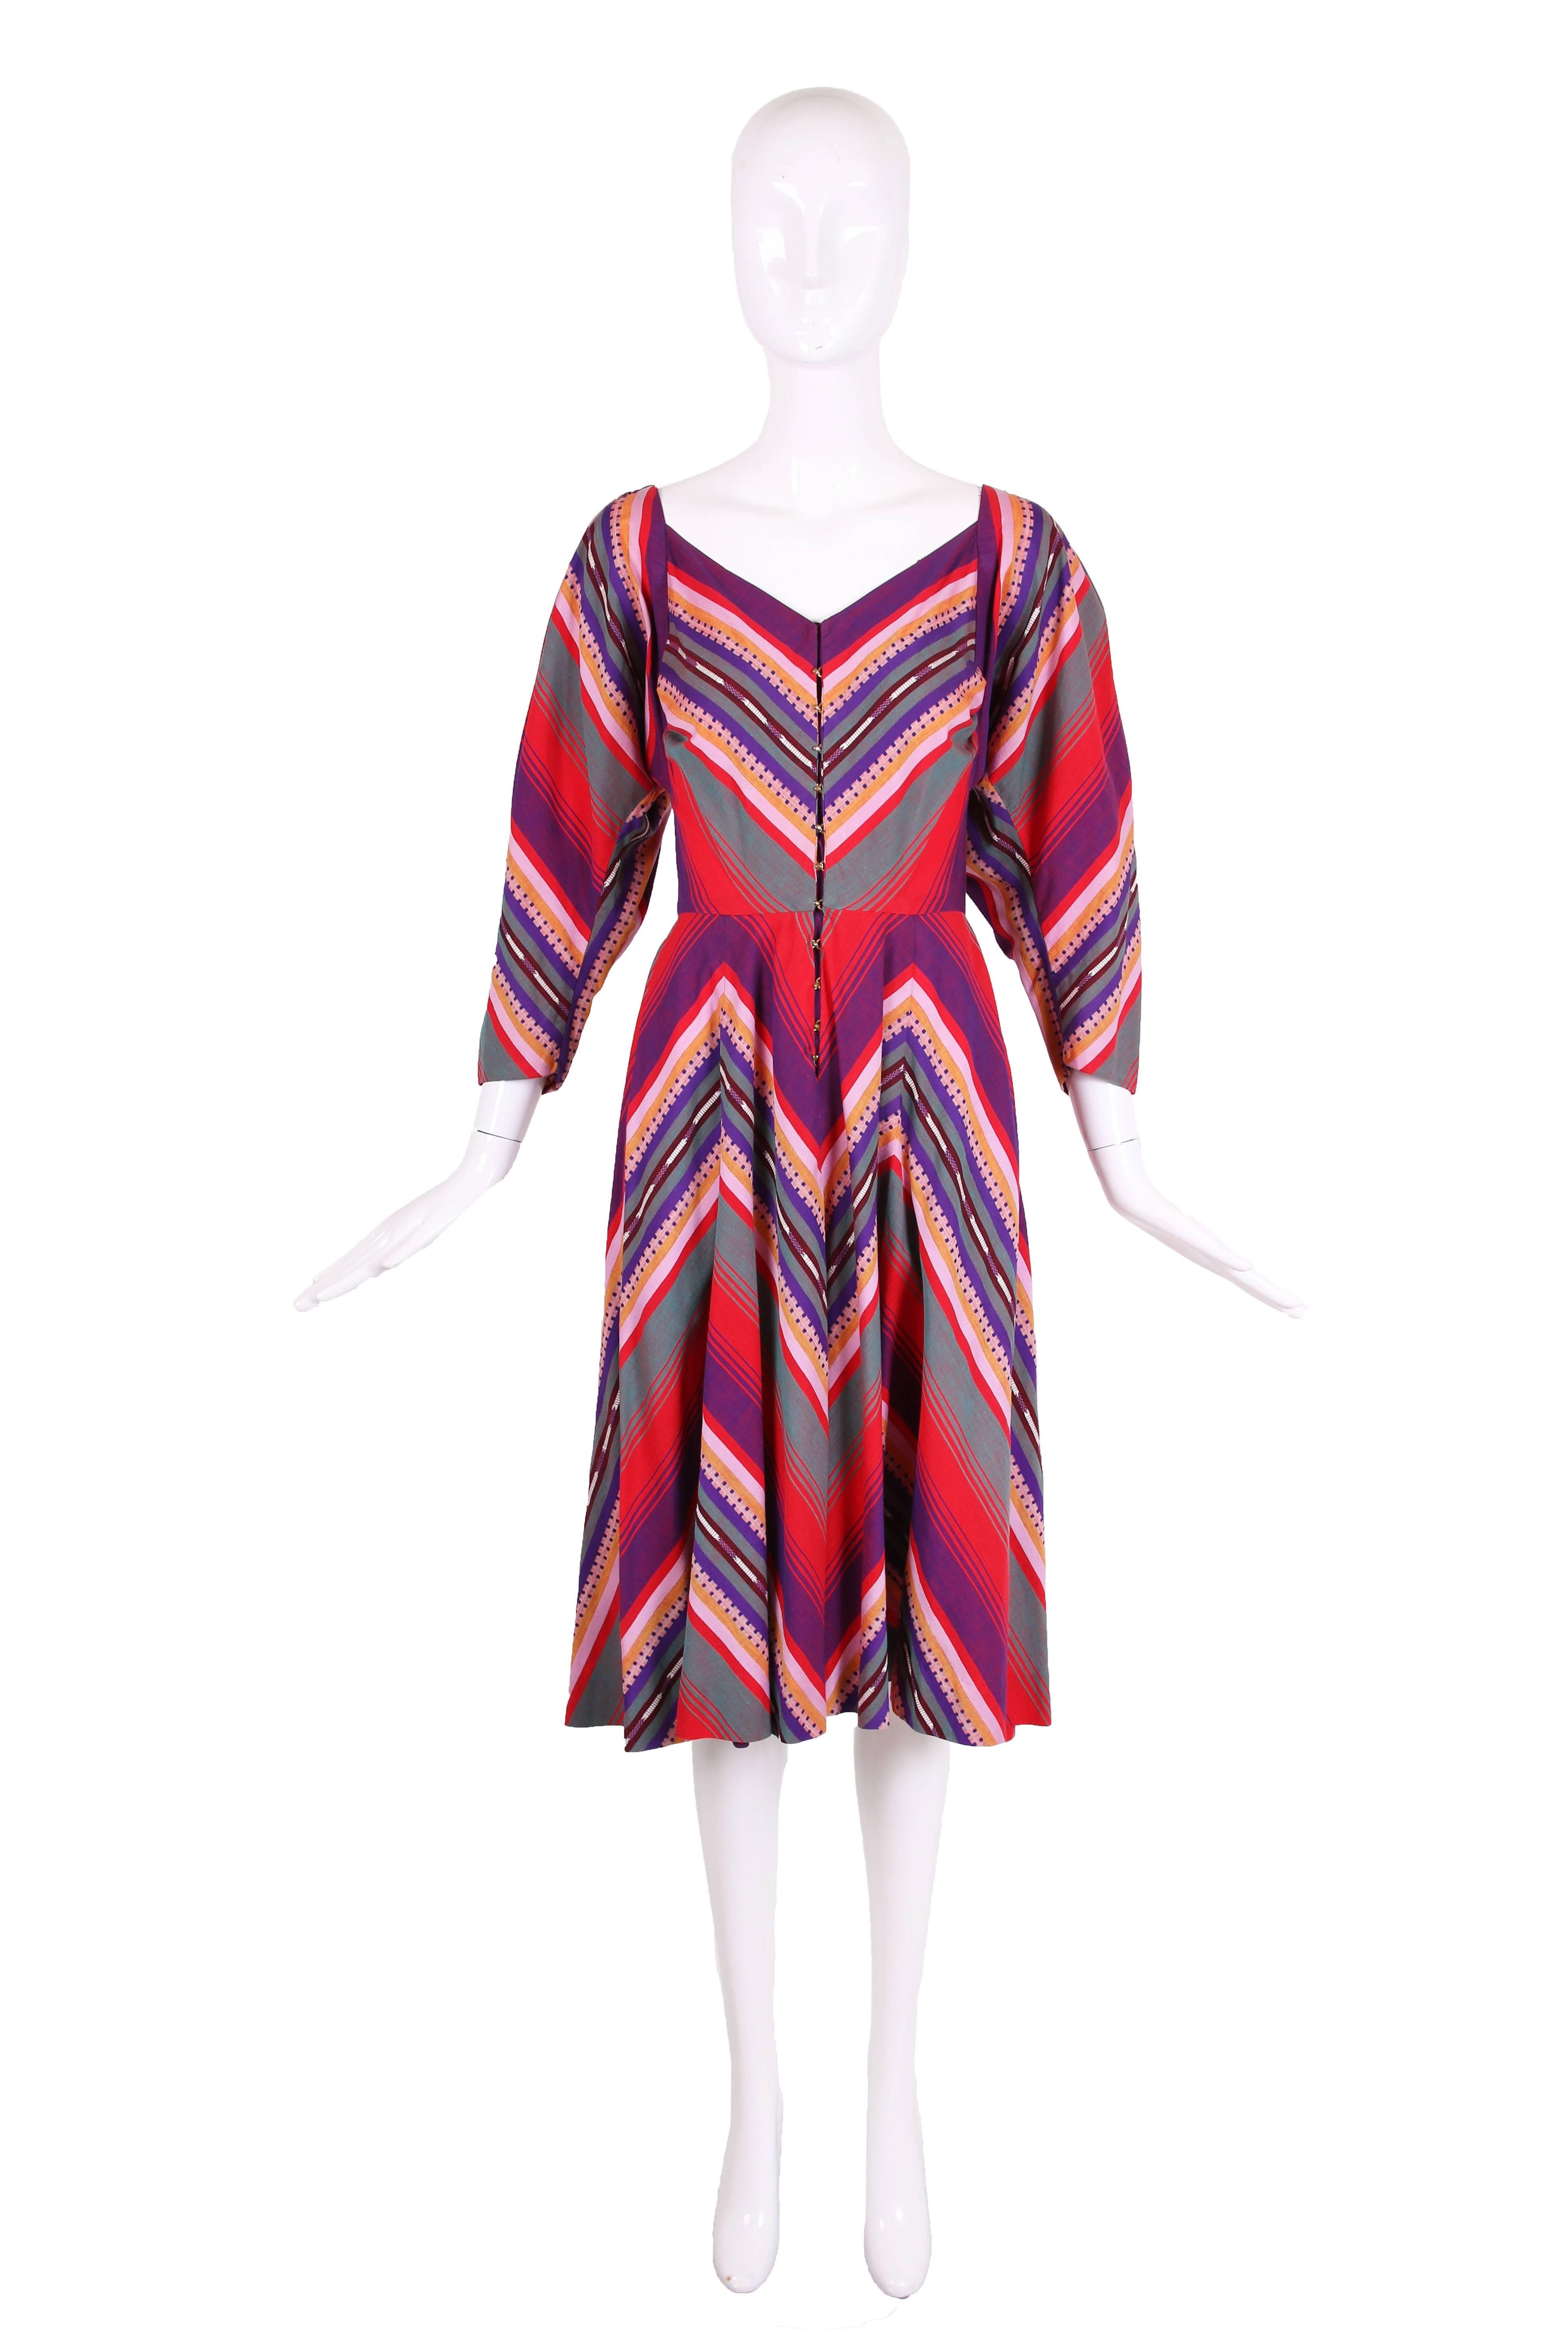 1950's Claire McCardell Clothes by Townley cotton serape print day dress in purple, red, pink, orange, navy blue, and green. Dress has a V-neck, dolman sleeves, and full skirt. Metal hook and eye closures down center front. Hidden pockets at both